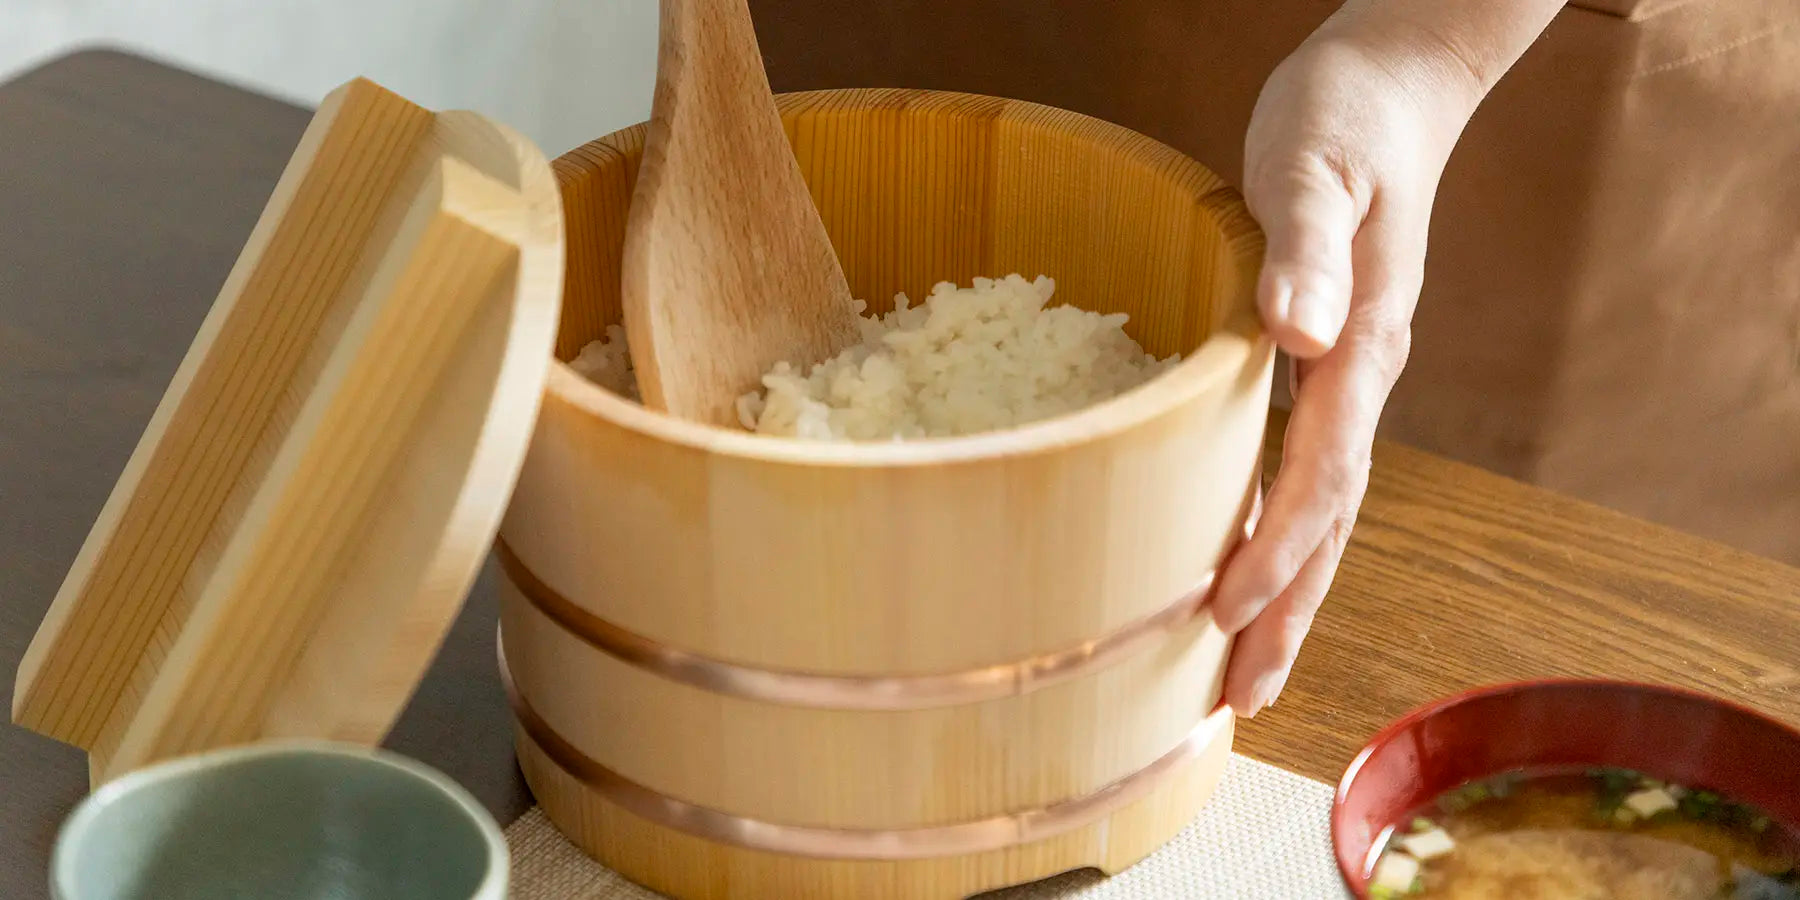 Discover our great selection of Prepare Rice supplies on Globalkitchen Japan.